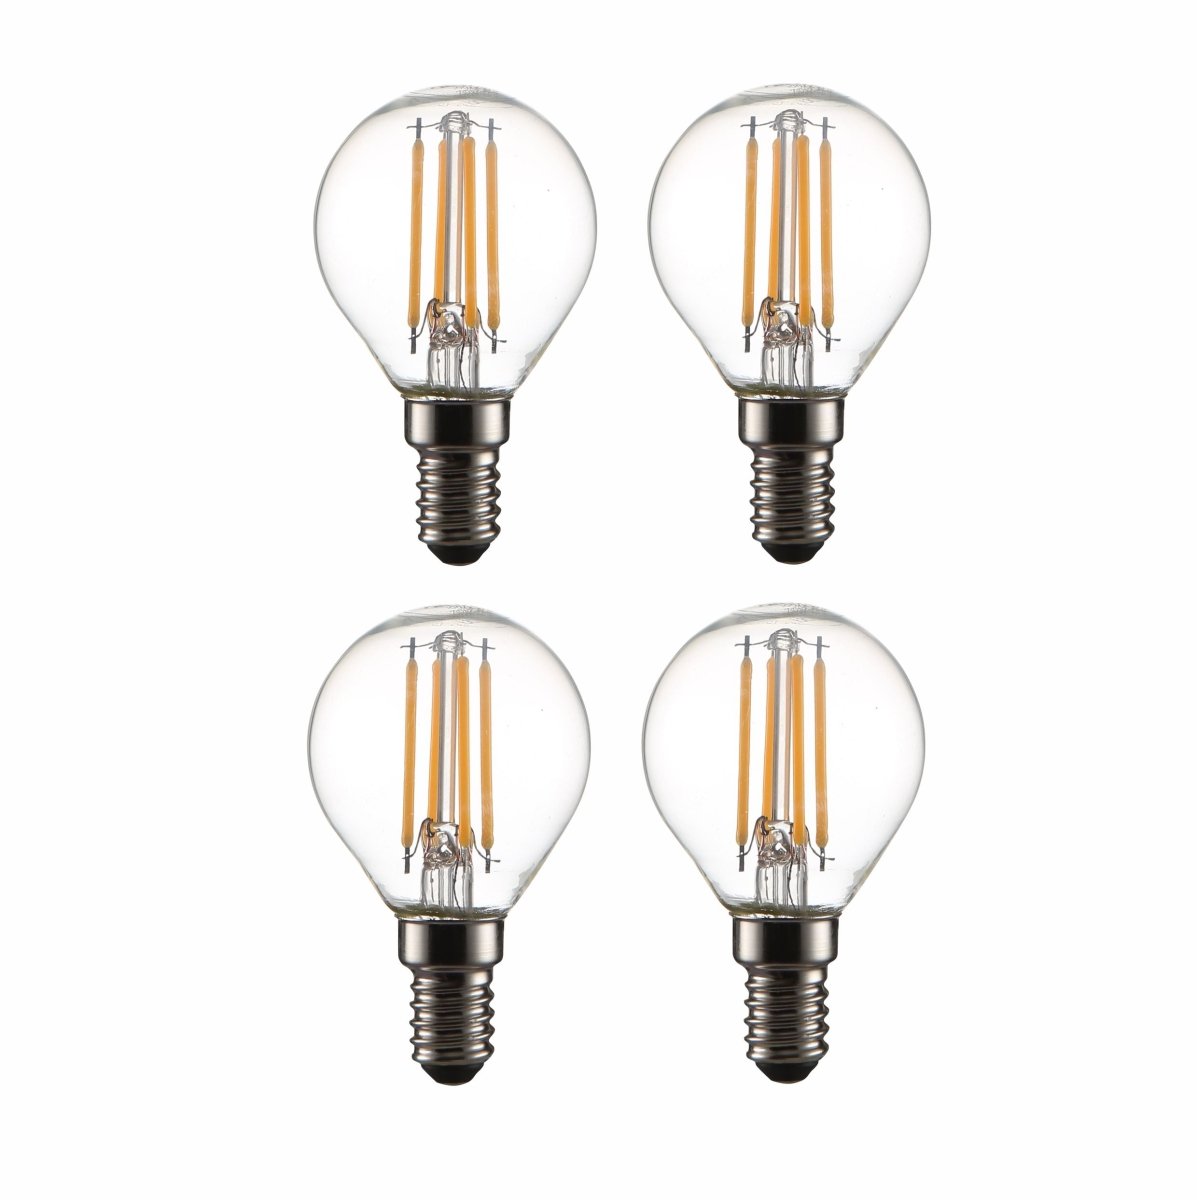 Main image of LED Dimmable Filament Bulb P45 Golf Ball E14 Small Edison Screw 4W 470lm Warm White 2700K Clear Pack of 4 | TEKLED 583-150224